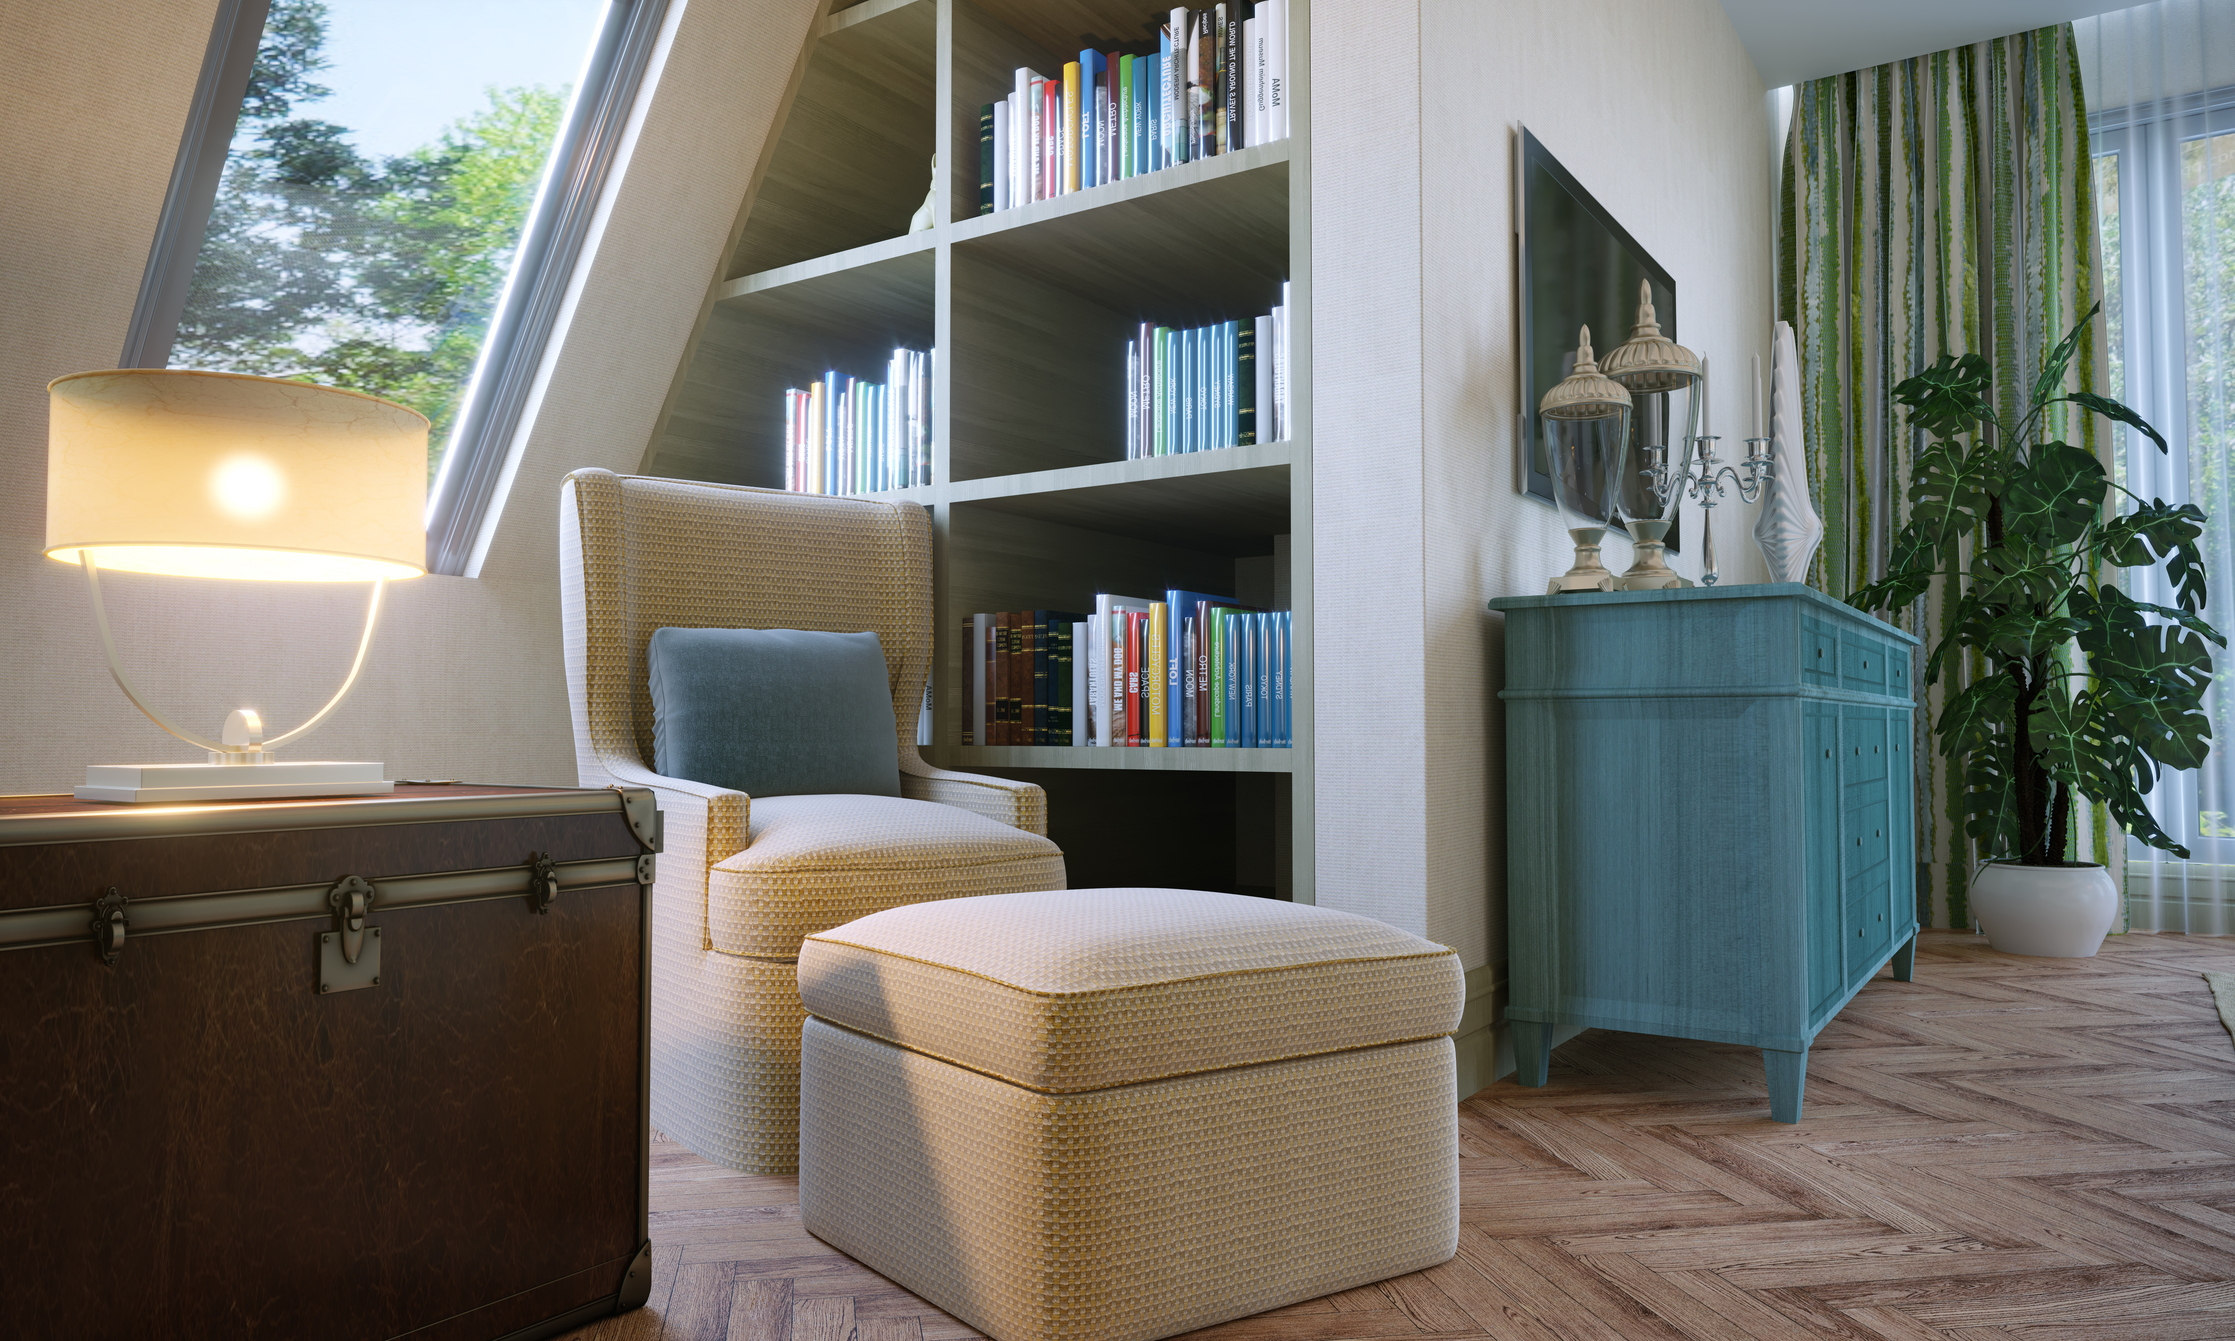 An inviting reading nook with a cozy armchair, ottoman, built-in bookshelf filled with books, a lamp, a chest, and a blue dresser, set near a window with greenery outside